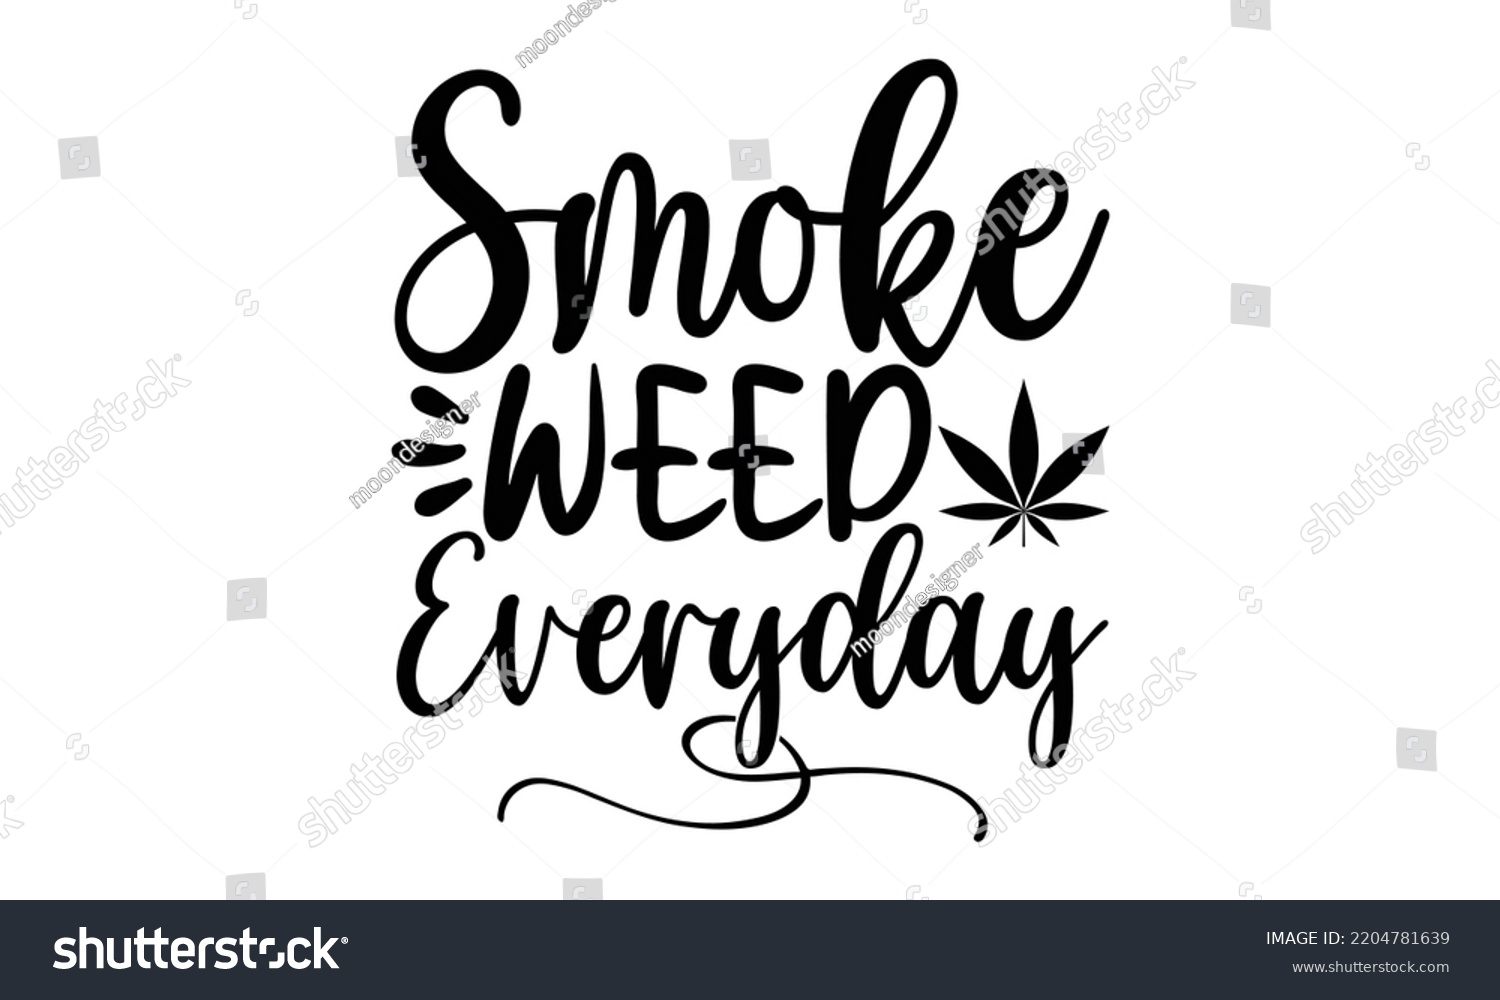 SVG of smoke weed everyday - Cannabis T-shirt and svg design, merchandise graphics, typography design, svg Files for Cutting and Silhouette, can you download this Design, EPS, 10 svg